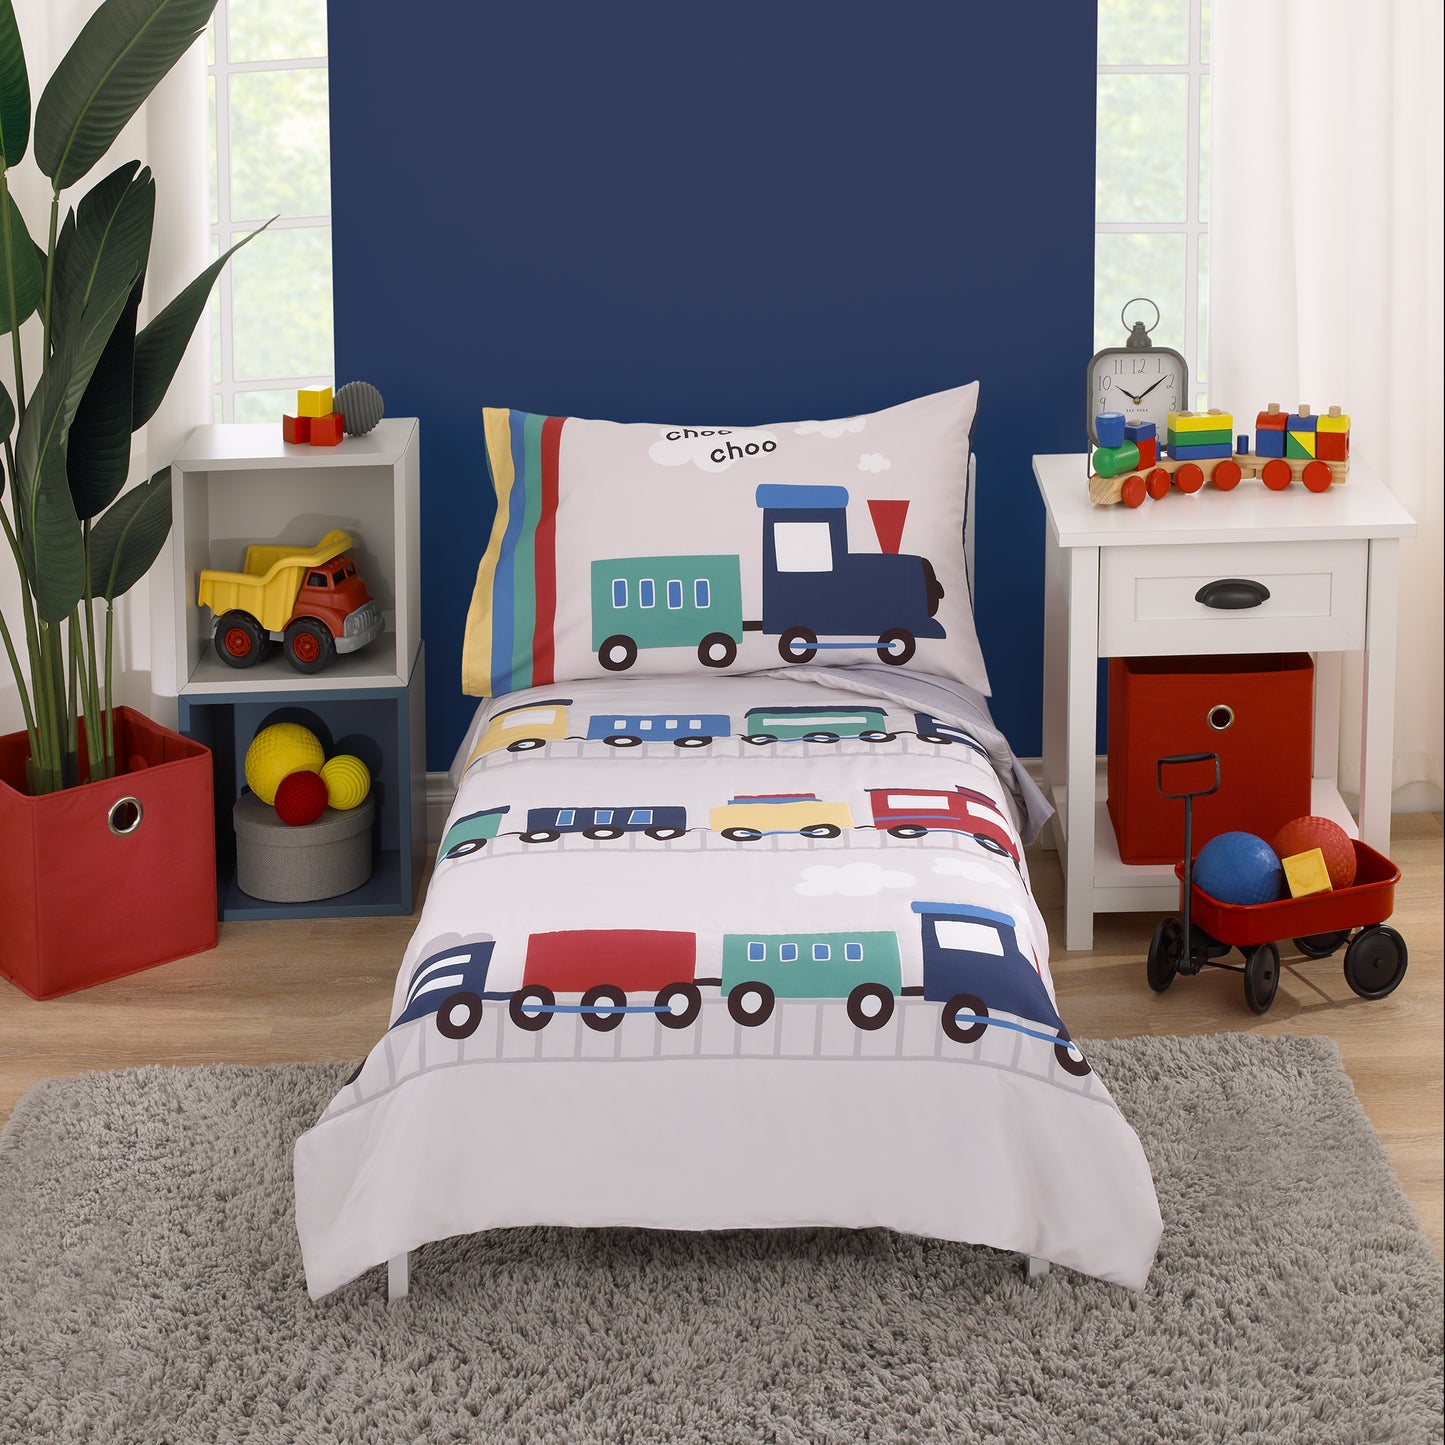 Everything Kids Choo Choo Train Gray, Blue, Red, and Yellow All Aboard 4 Piece Toddler Bed Set - Comforter, Fitted Bottom Sheet, Flat Top Sheet, Reversible Pillowcase